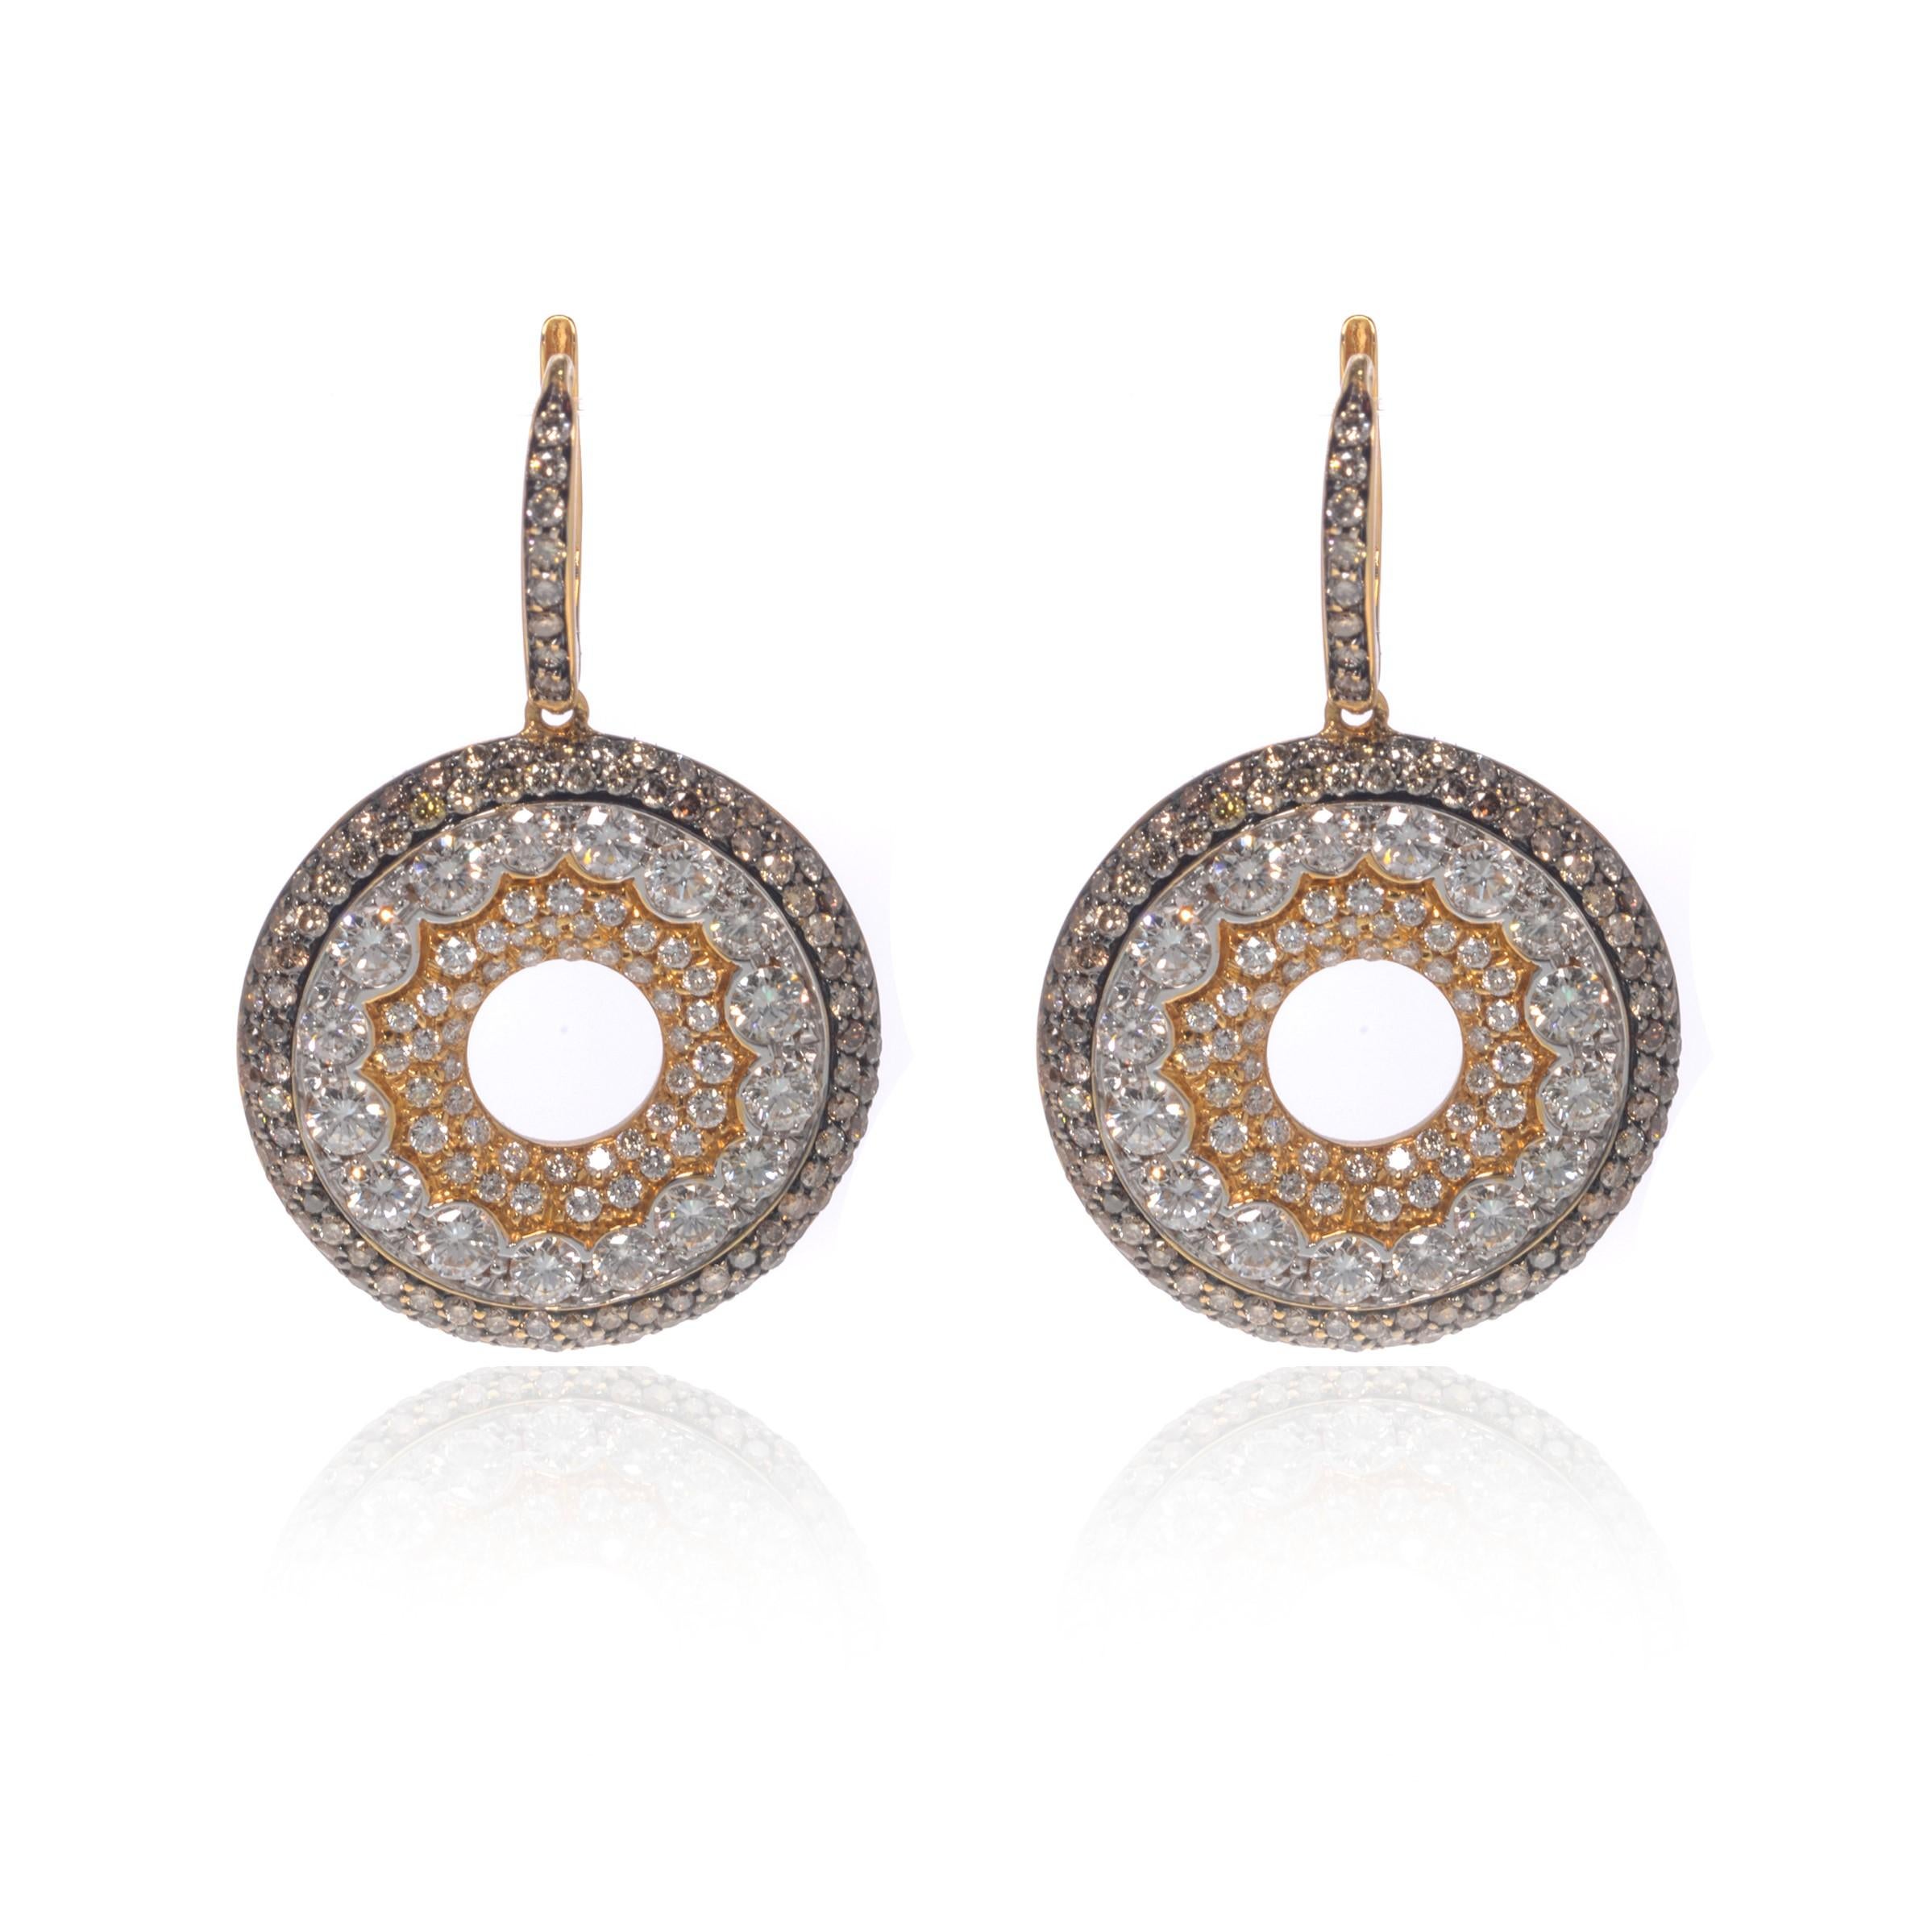 These magnificent diamond medium drop earrings with their lavish white and brown diamonds create a look that will make you feel truly luxurious and elegant. Presented in fine 18k rose gold with black rhodium. Showcasing a set of 3.57cttw of white